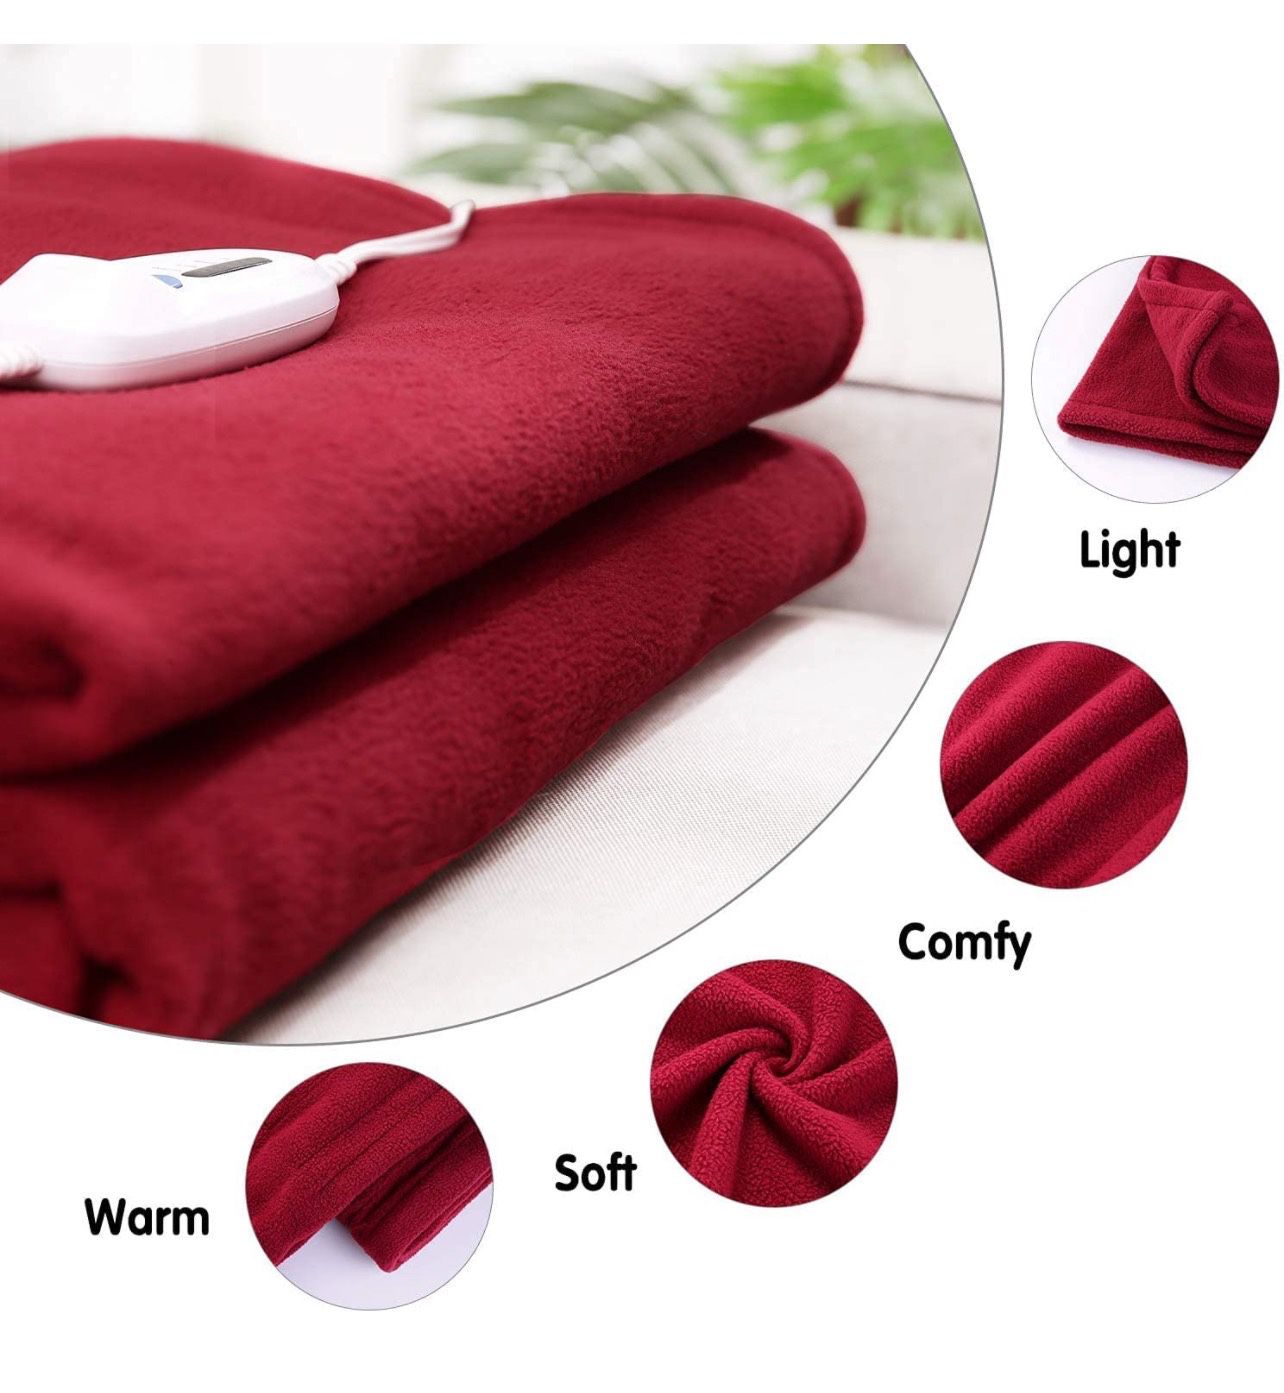 Electric Heated Blanket Polar Fleece Full Size 77 Inches x 84 Inches Extra-Warm Lightweight Cozy Luxury Bed Blanket Machine Washable with 4 Heating Le